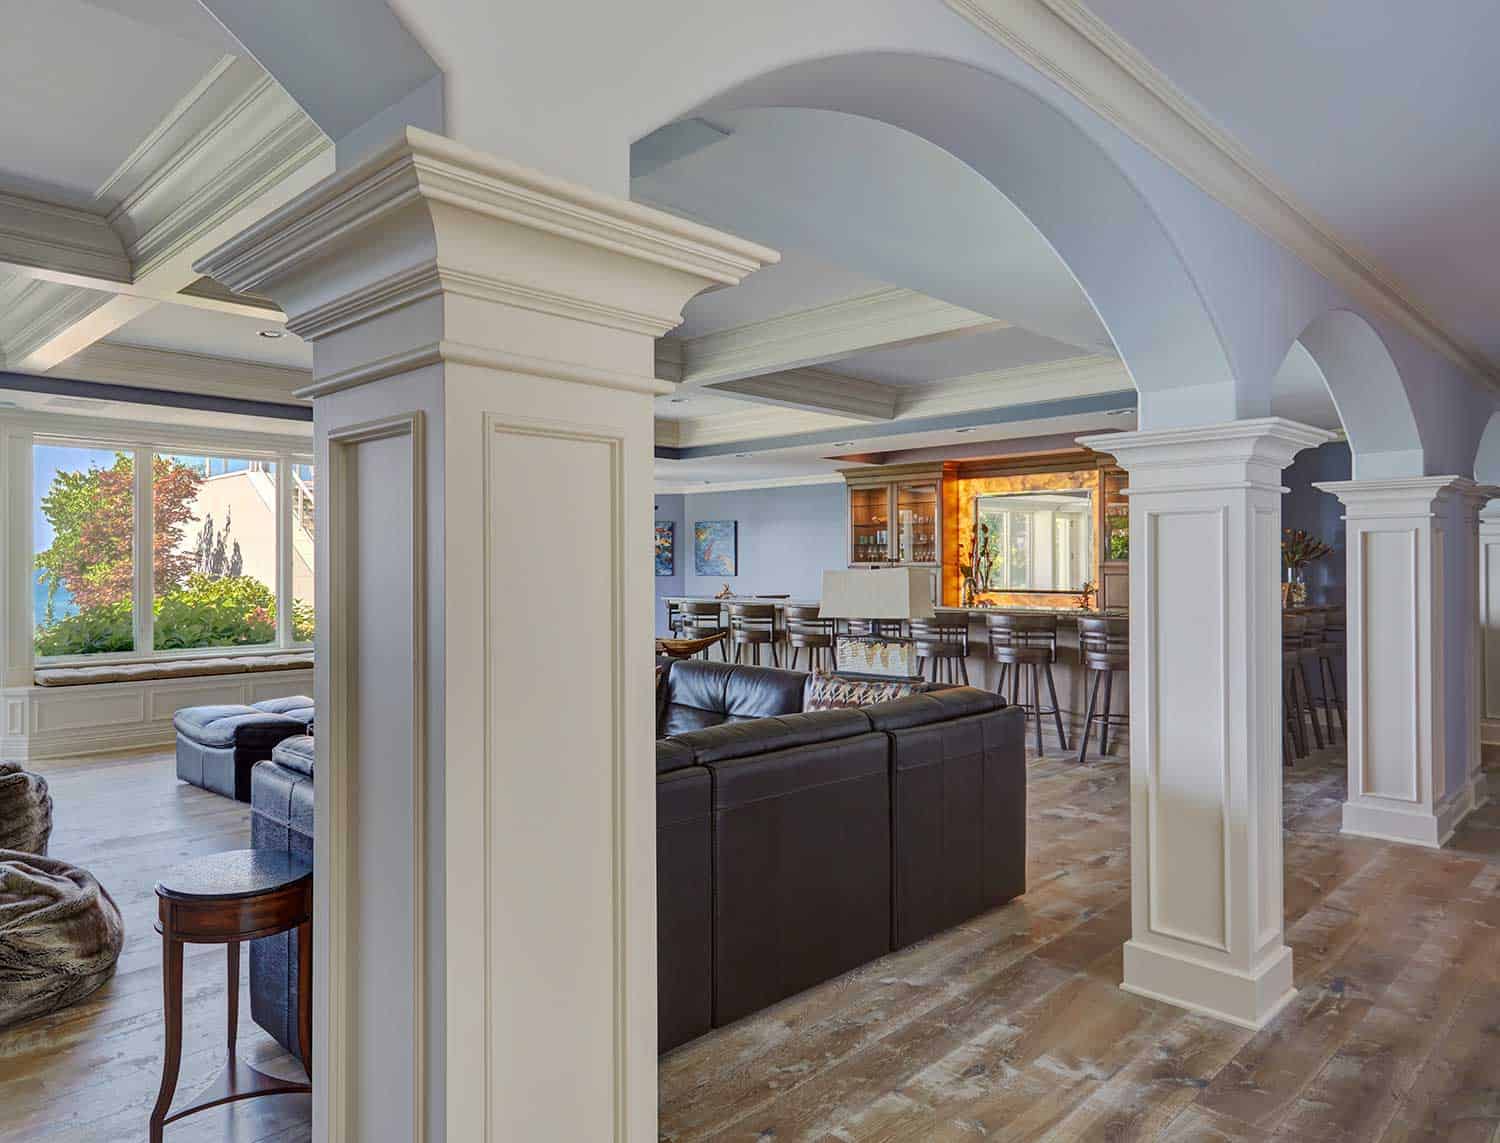 paneled-columns-connect-arched-openings-lower-level-family-room